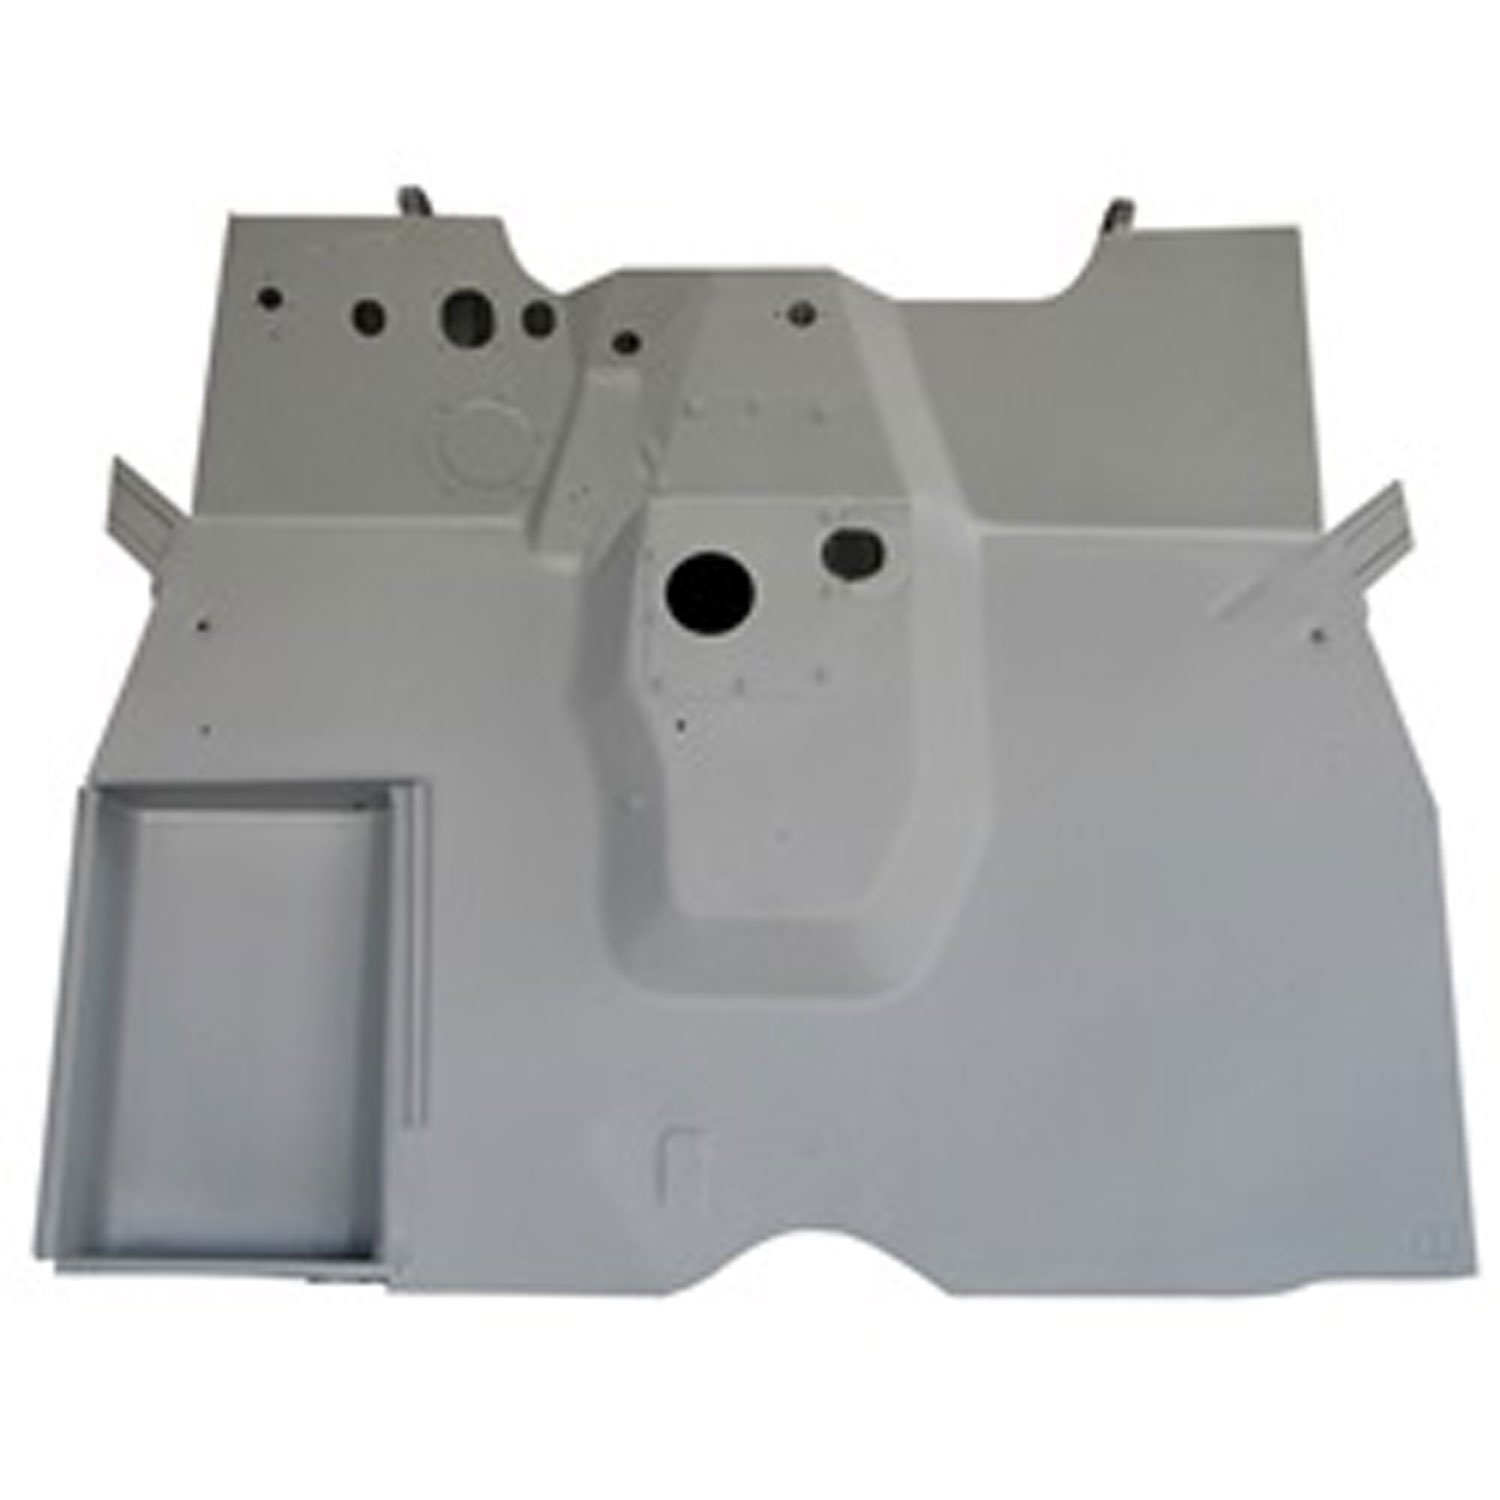 Replacement front floor panel from Omix-ADA, Fits 41-45 Willys MB and Ford GPW.is an 18 gauge steel panel.